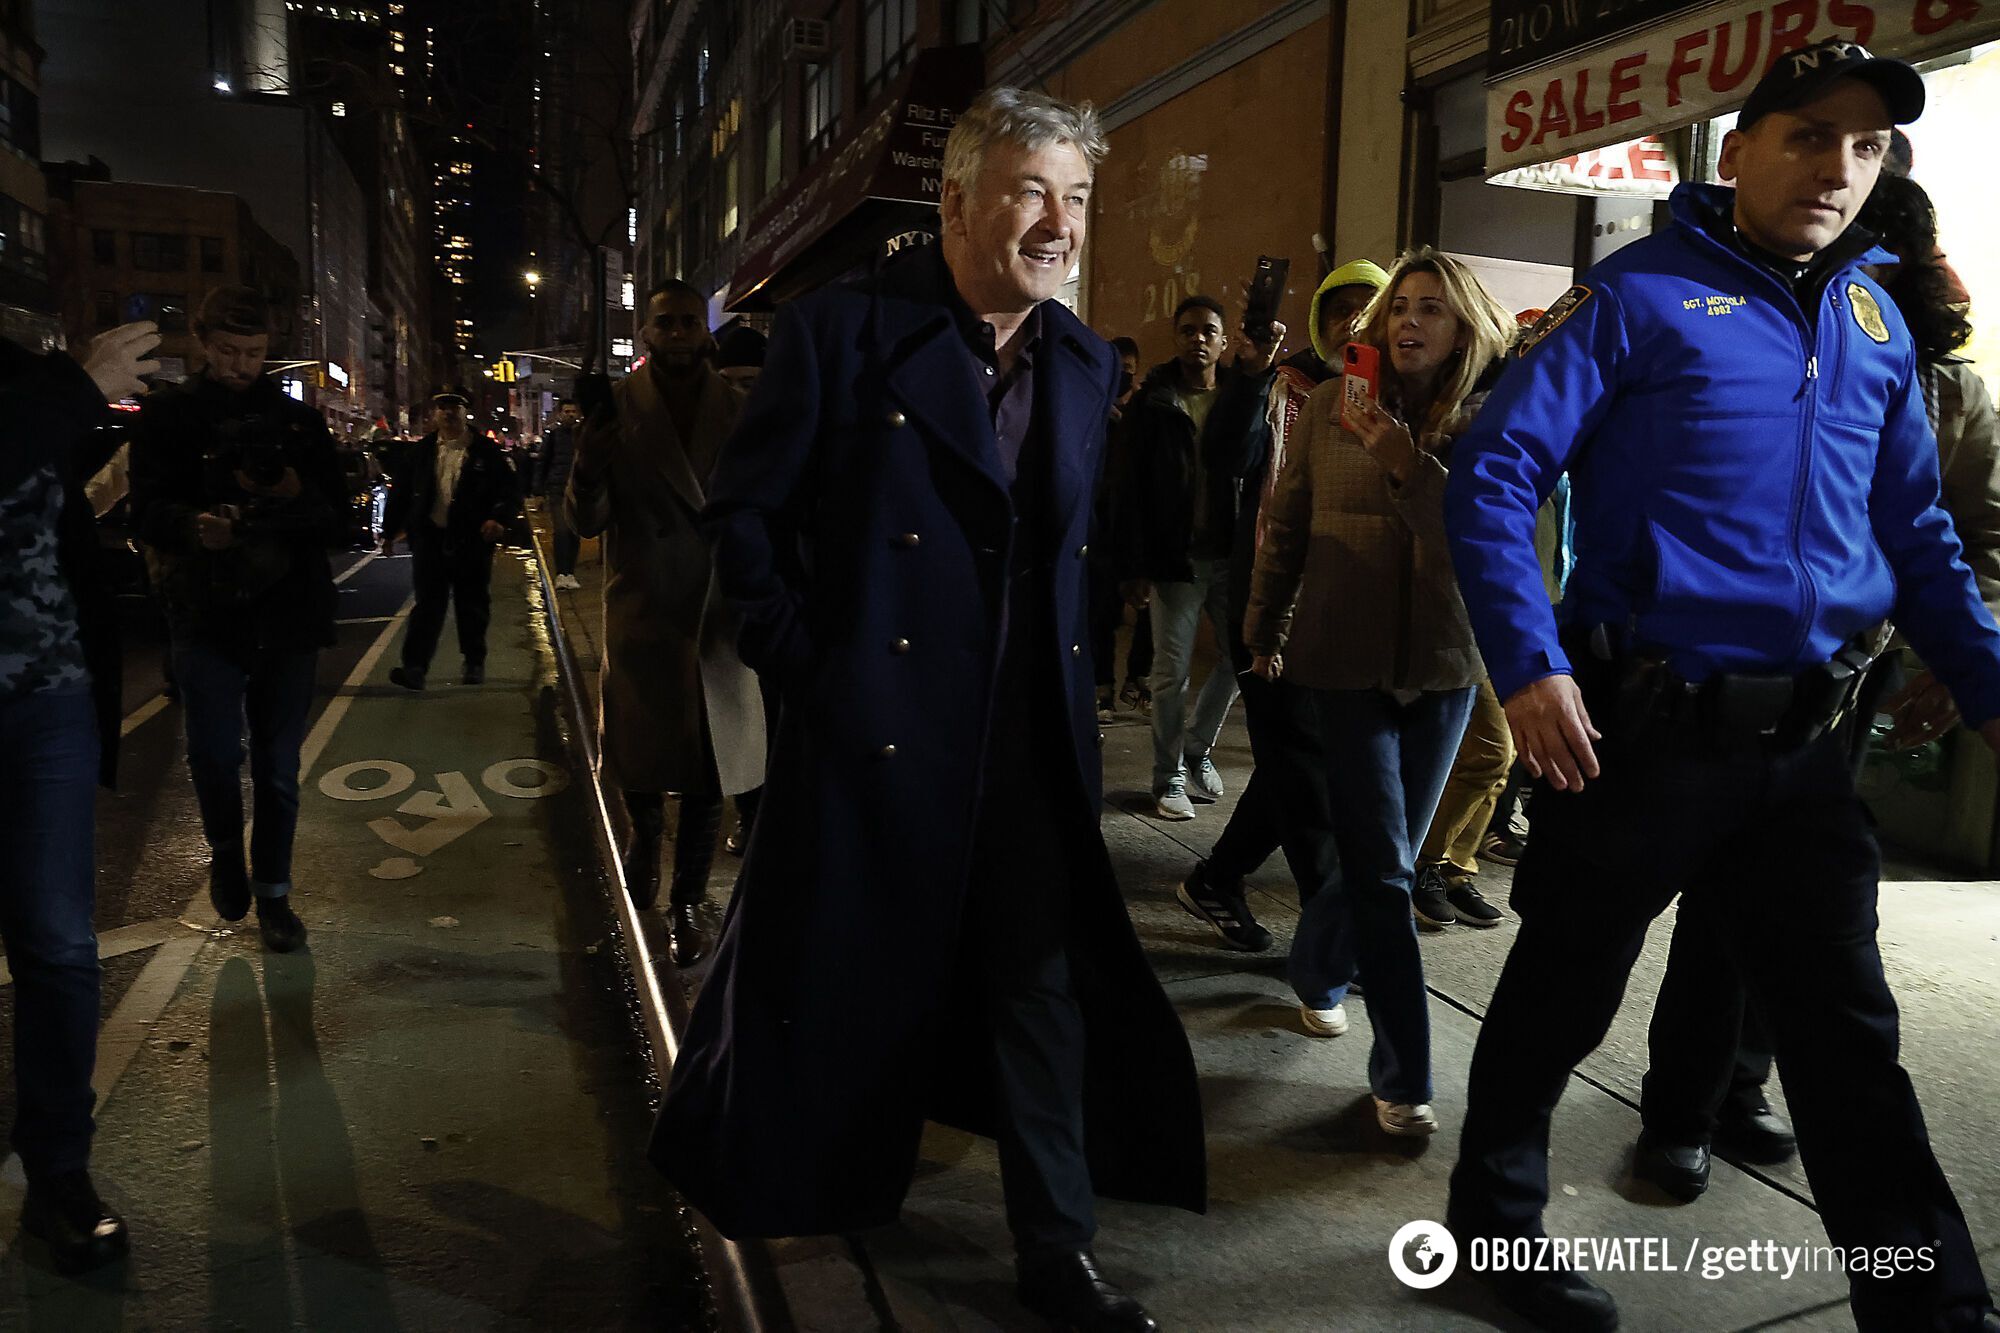 Alec Baldwin pushed and cursed at a protester who aggressively attacked the star over the war in Israel